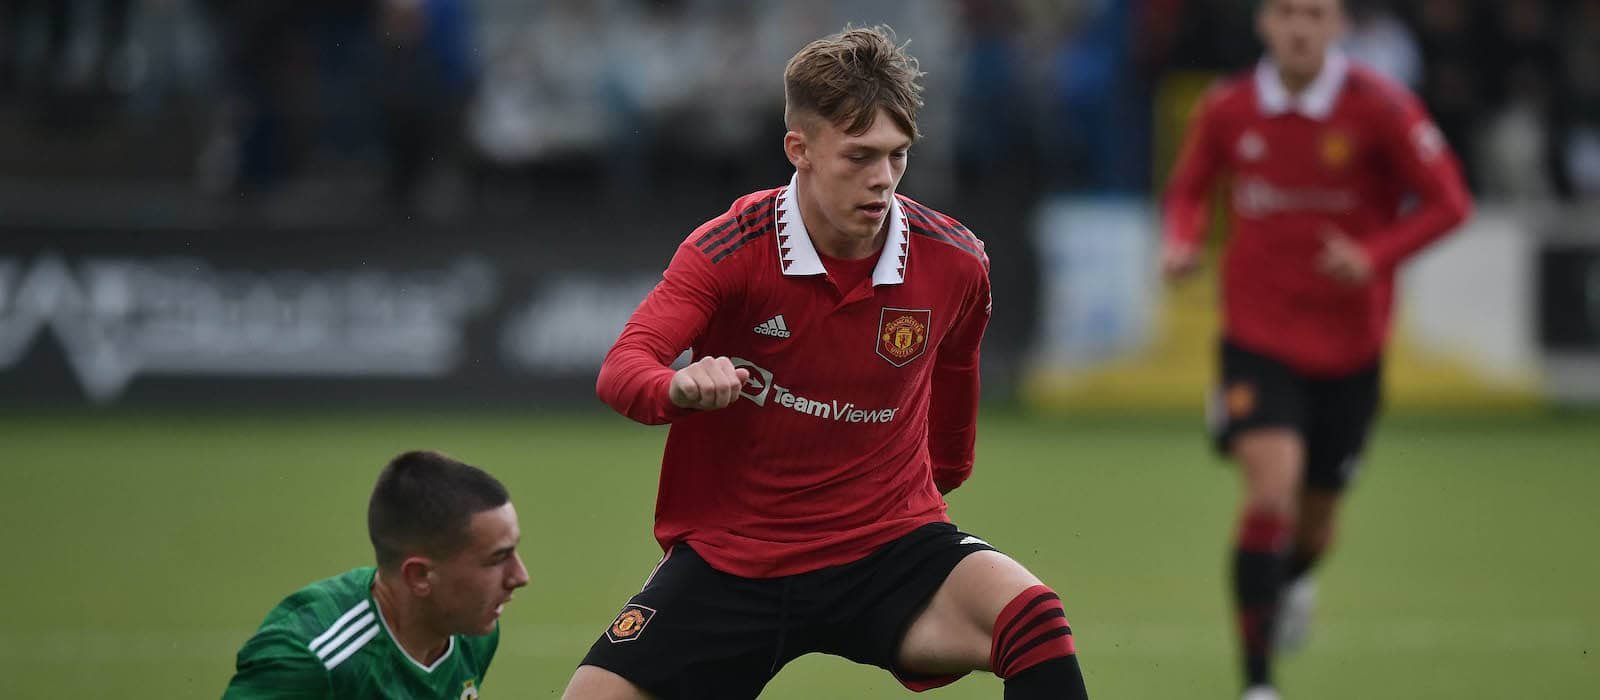 Sam Mather nominated for Premier League 2 Player of the Month award after stunning four goal display – Man United News And Transfer News